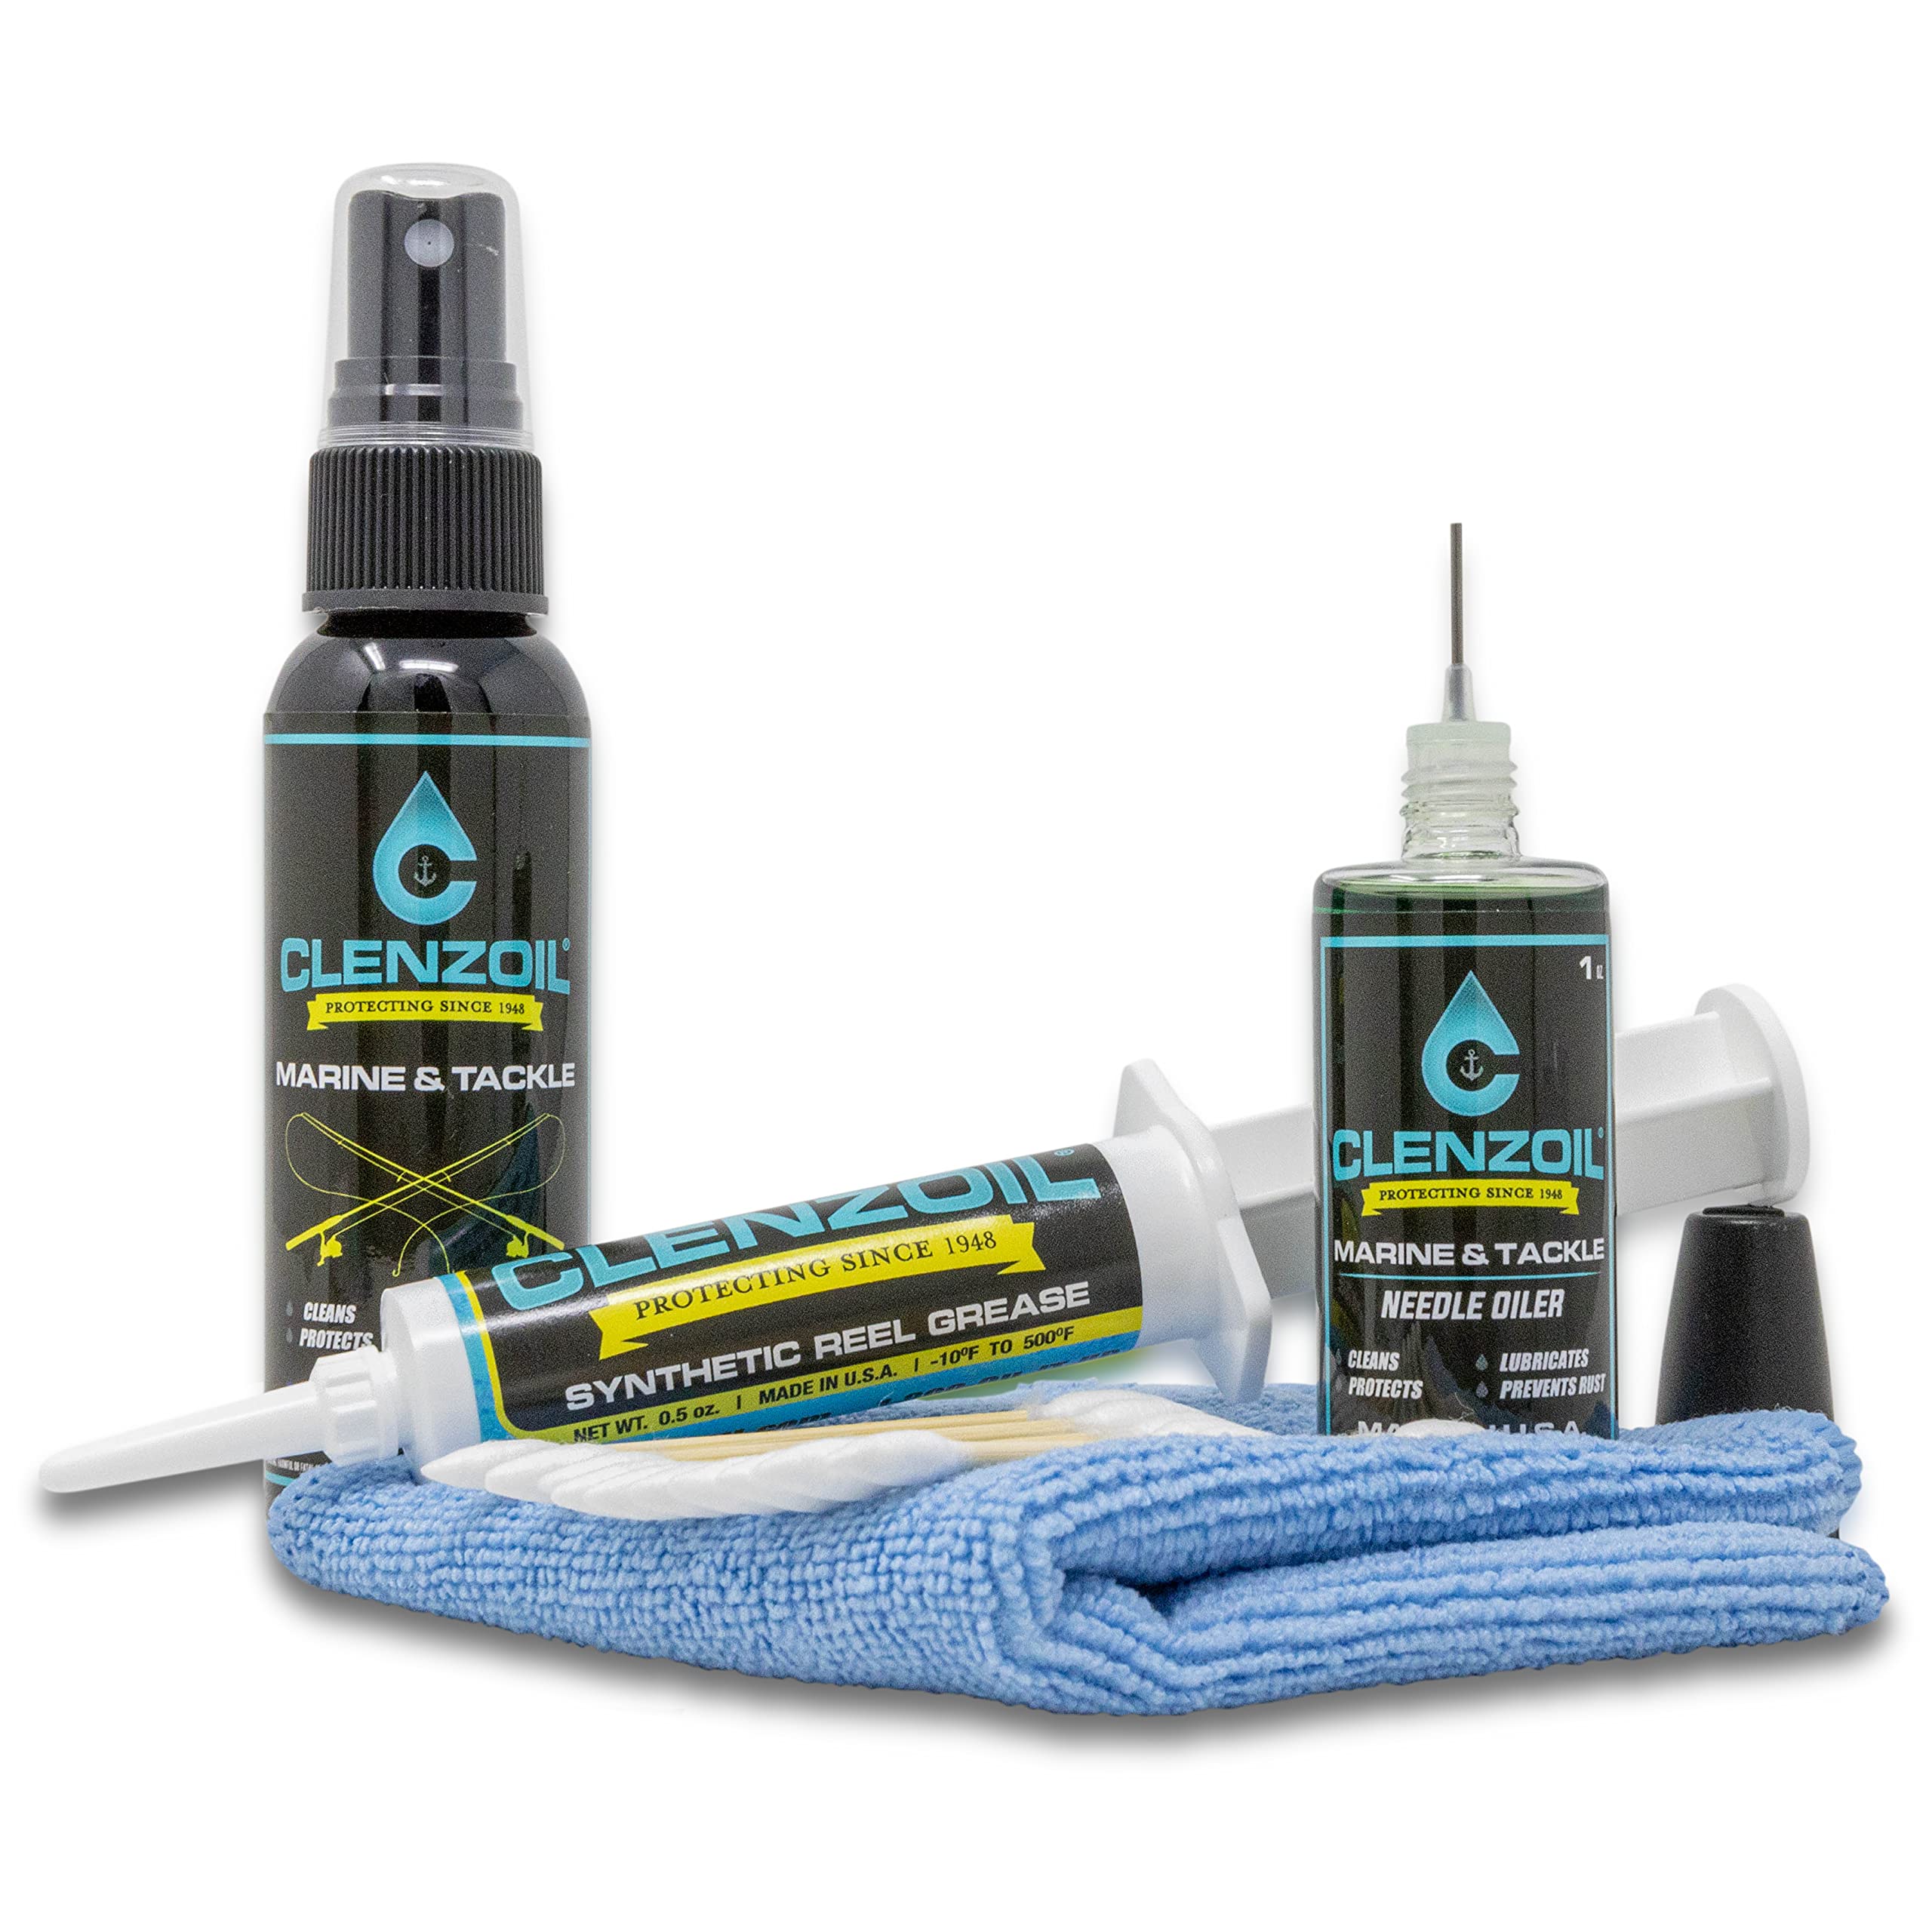 CLENZOIL Marine & Tackle Fishing Reel Oil, Bearing Oil Cleaner